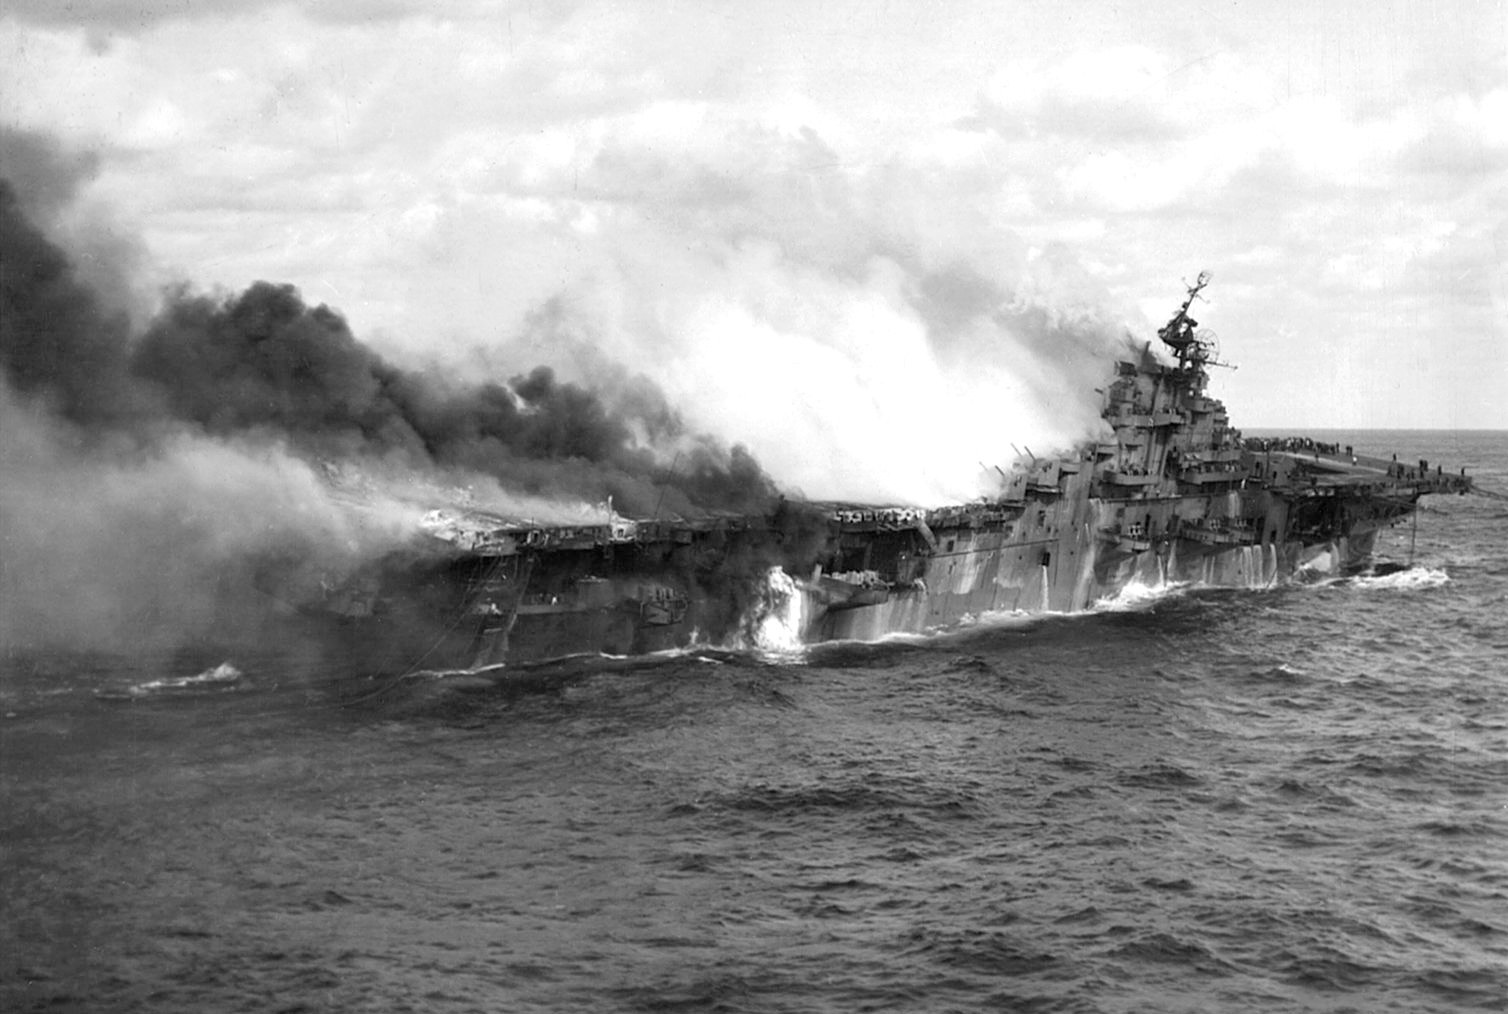 The Franklin burns furiously and begins to list after being hit by a pair of Japanese bombs.